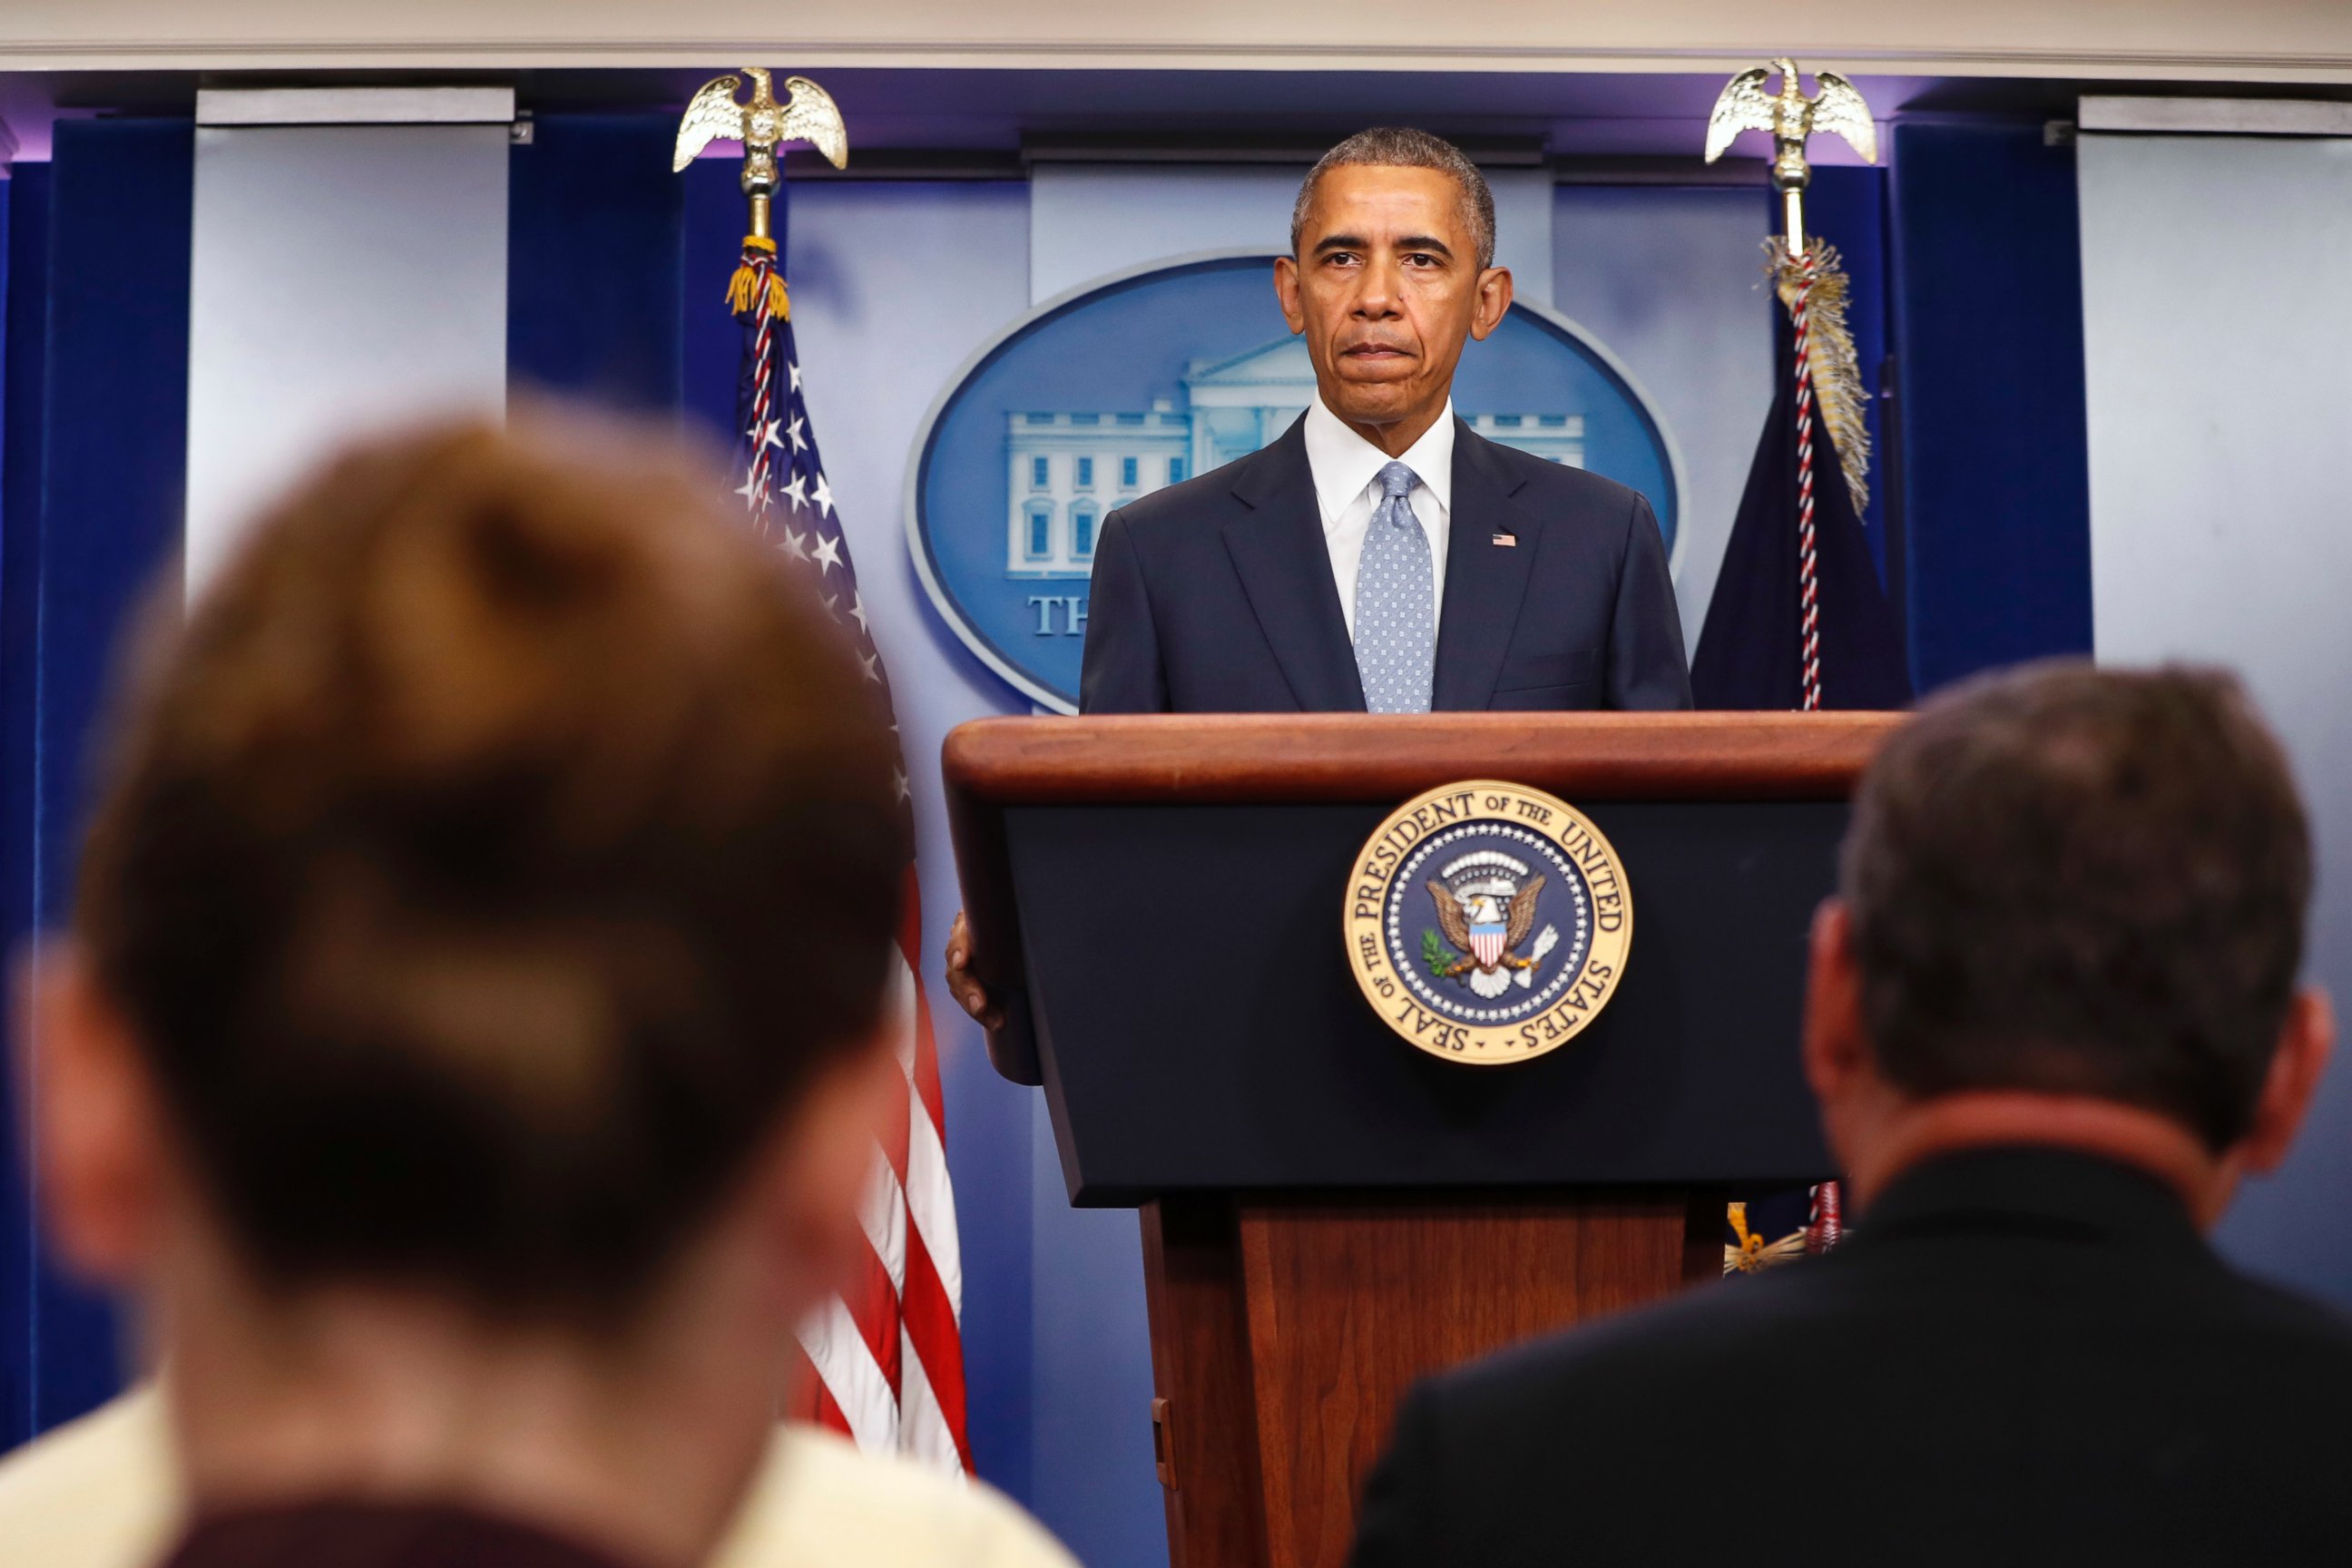 PHOTO: Reporters listen while President Barack Obama speaks about the Baton Rouge, Louisiana, shooting of police officers, July 17, 2016, from the briefing room of the White House in Washington.